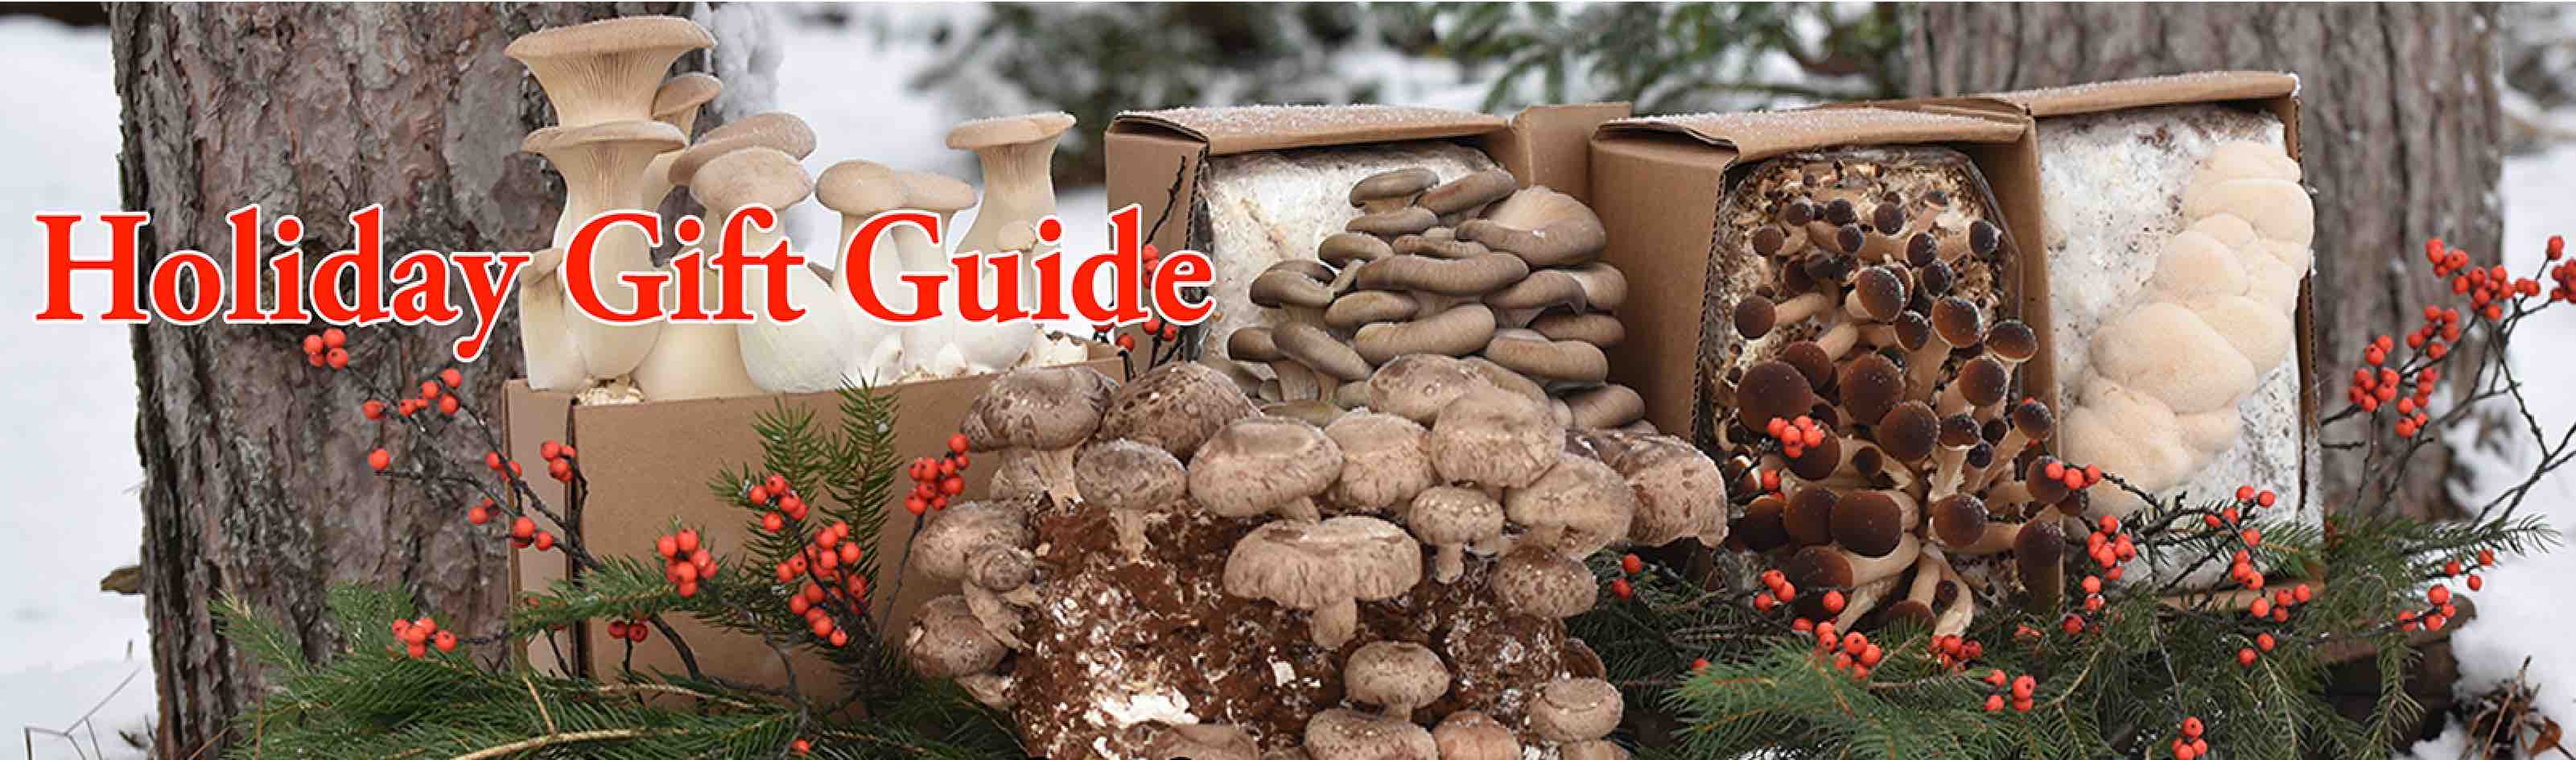 Mushroom gift guide text over a photo of various mushroom kits arranged in a winter scene